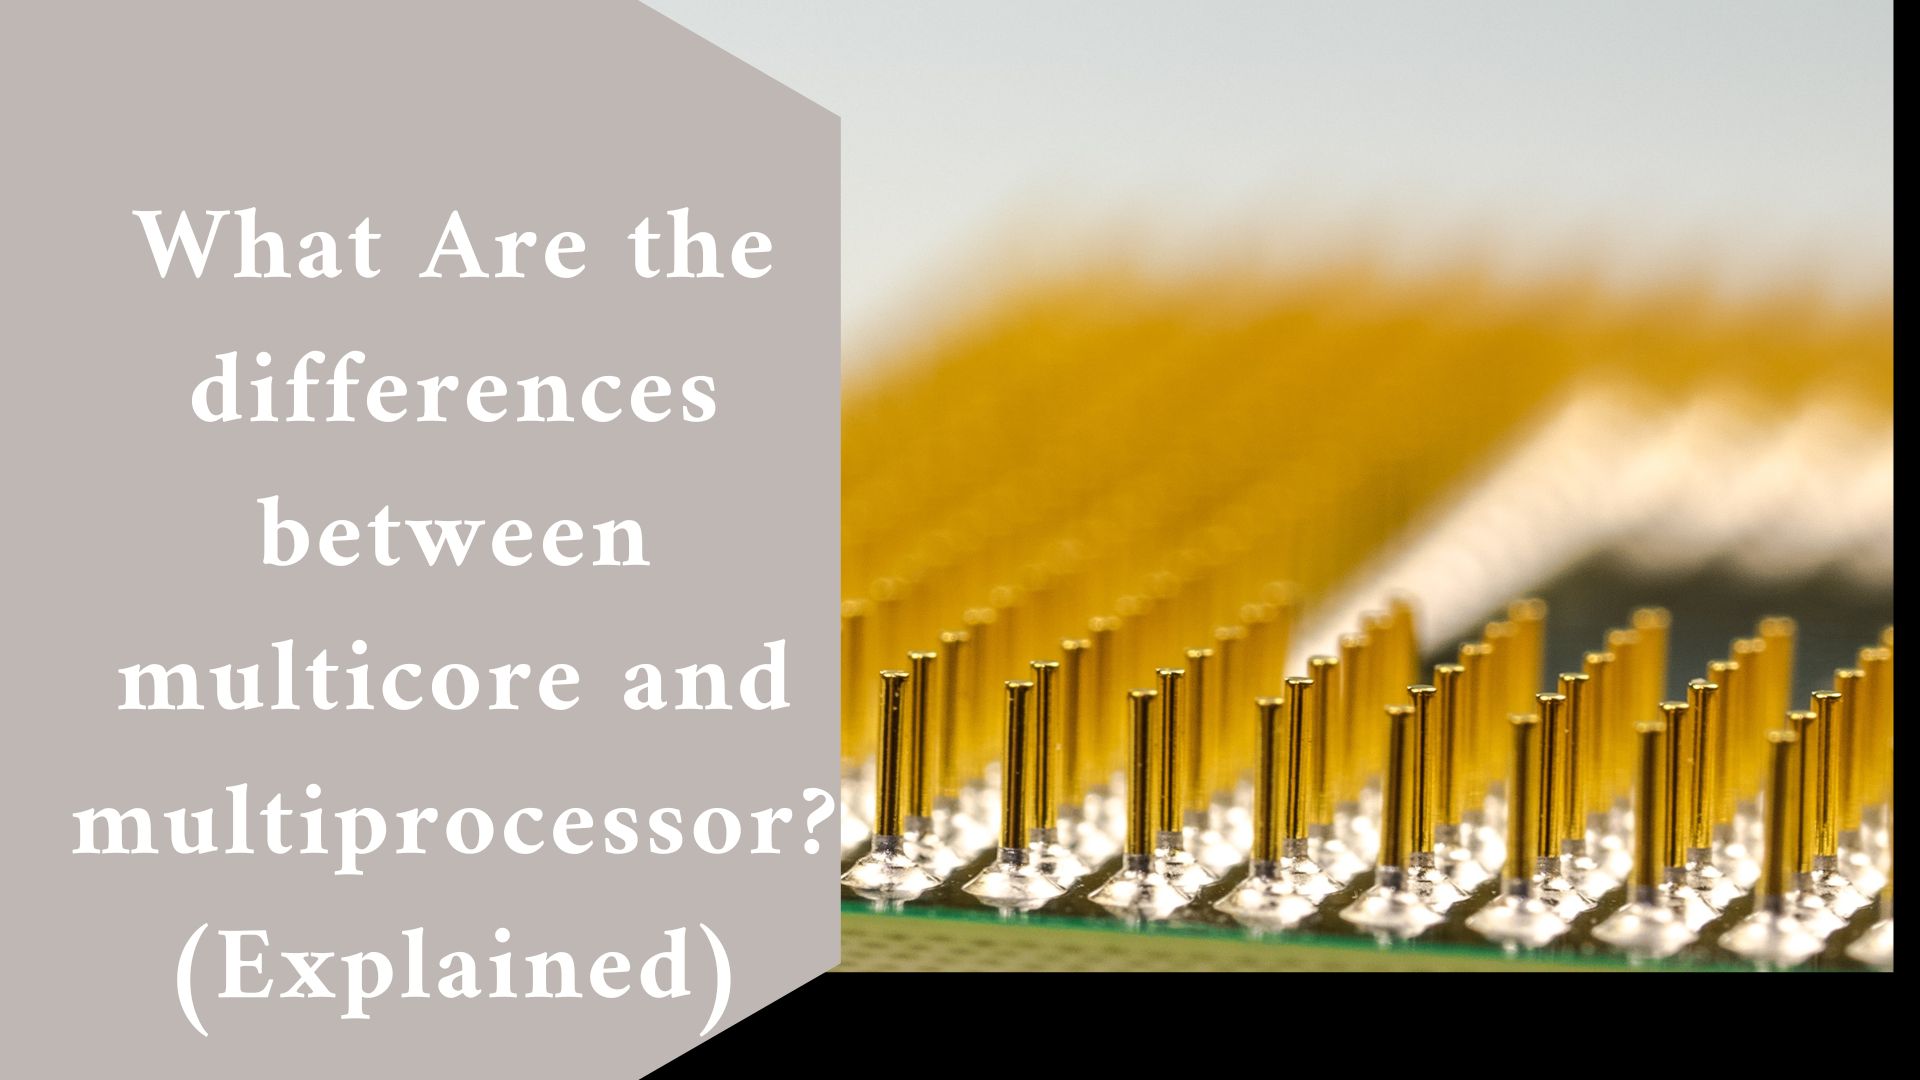 What Are the differences between multicore and multiprocessor? (Explained)